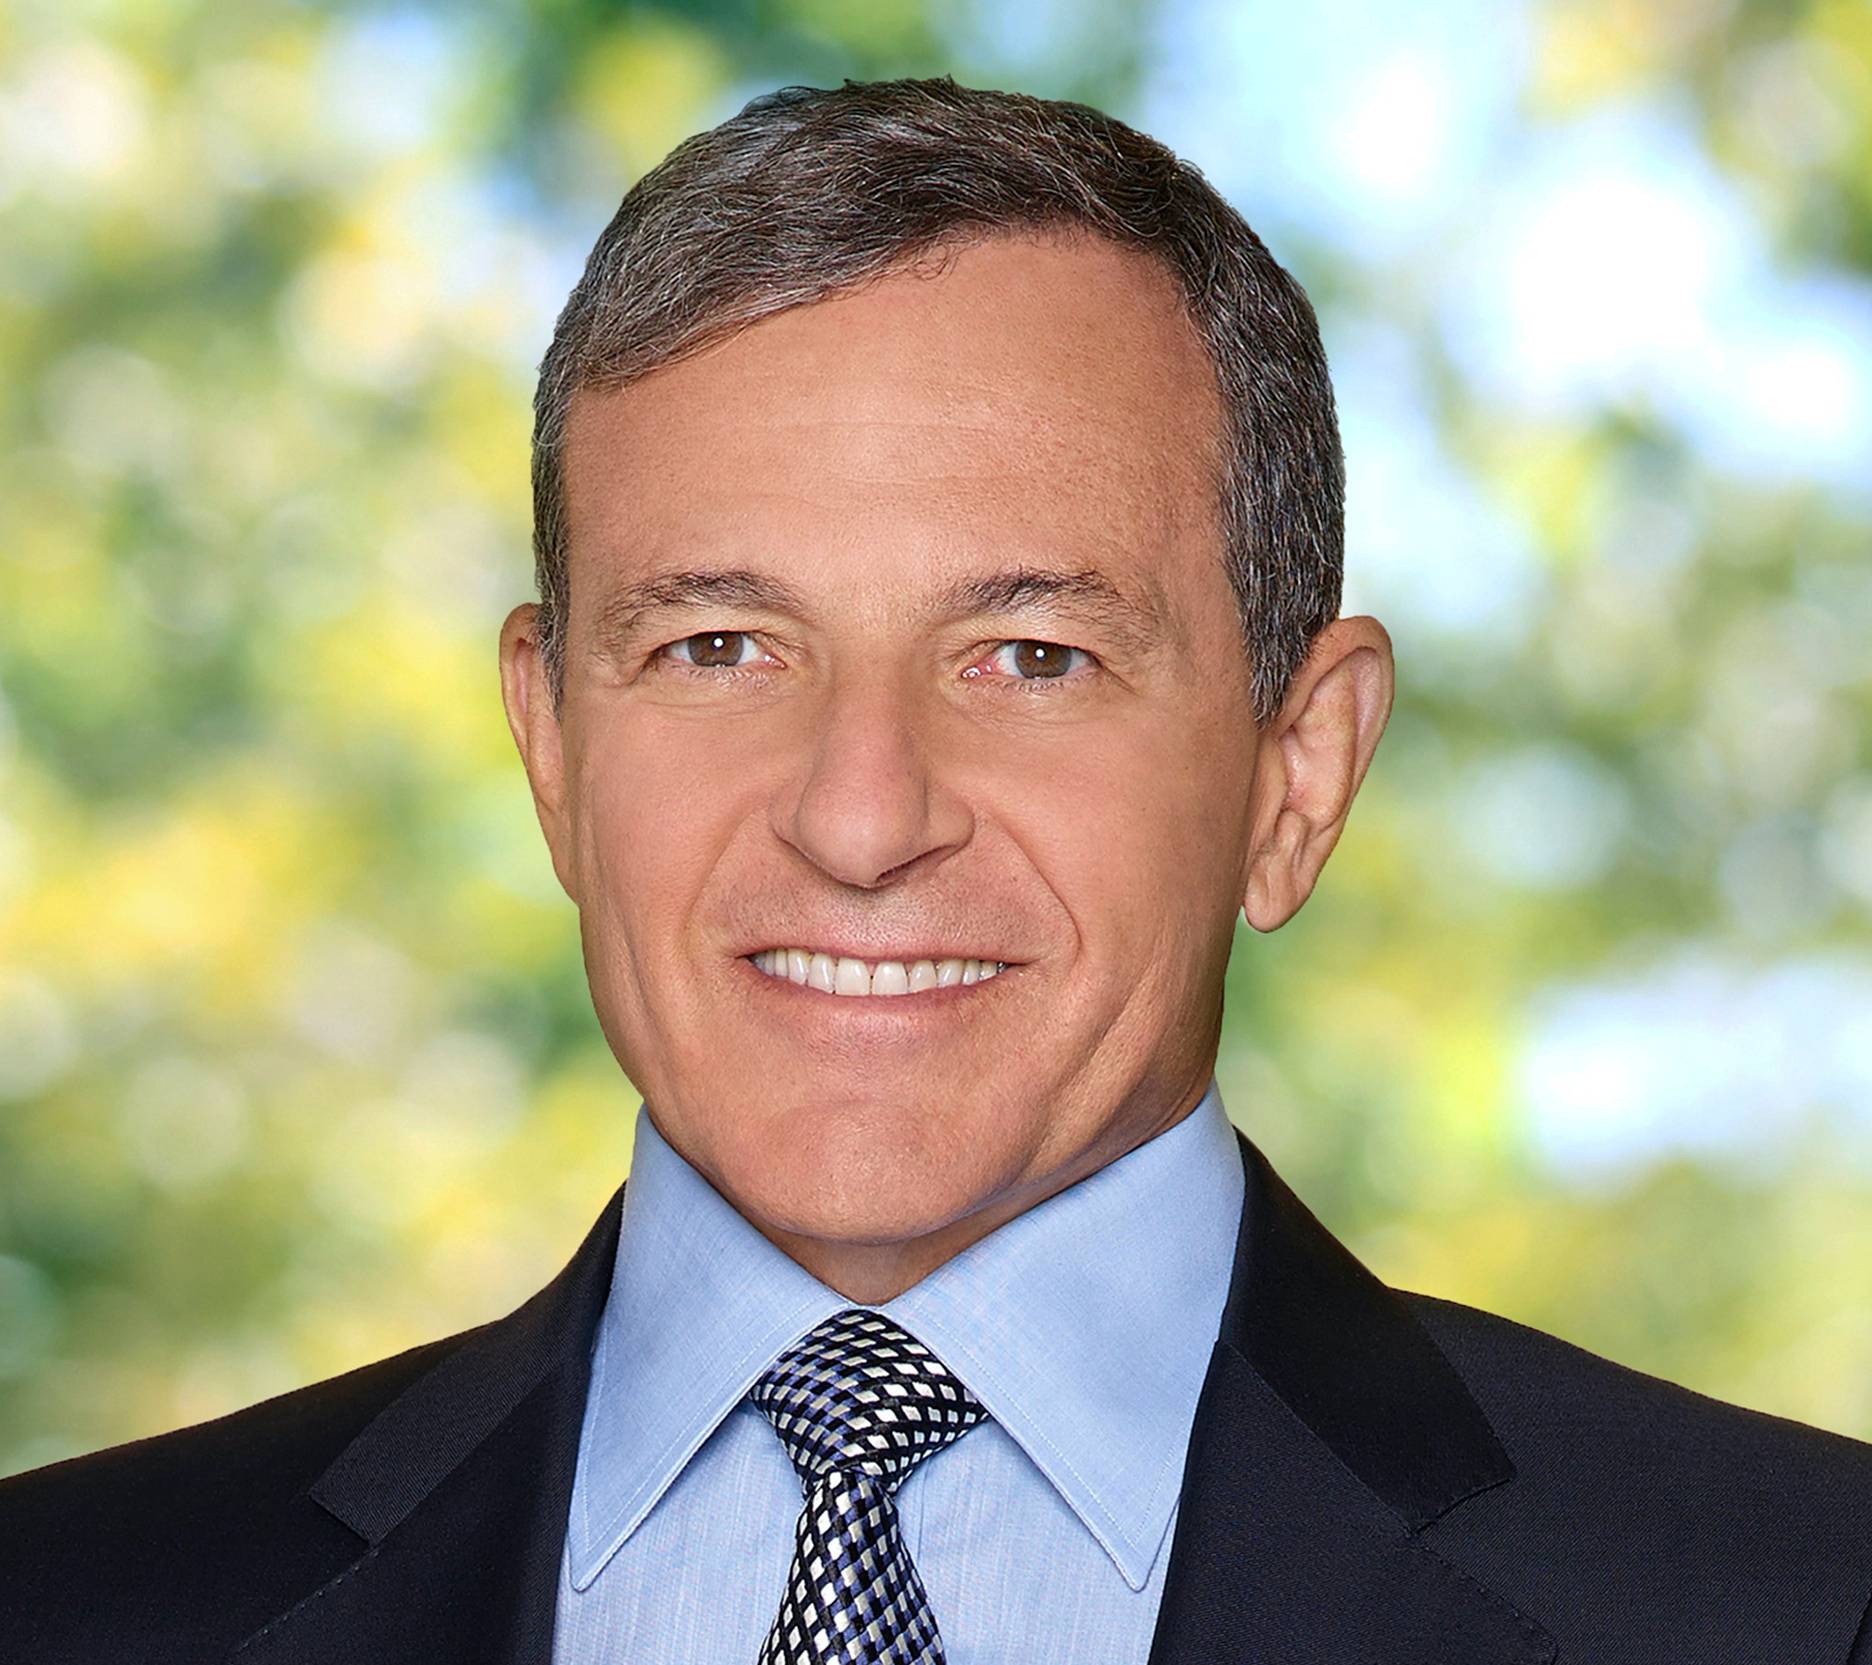 Bob Iger is asking staff to return to the office for 4 days a week